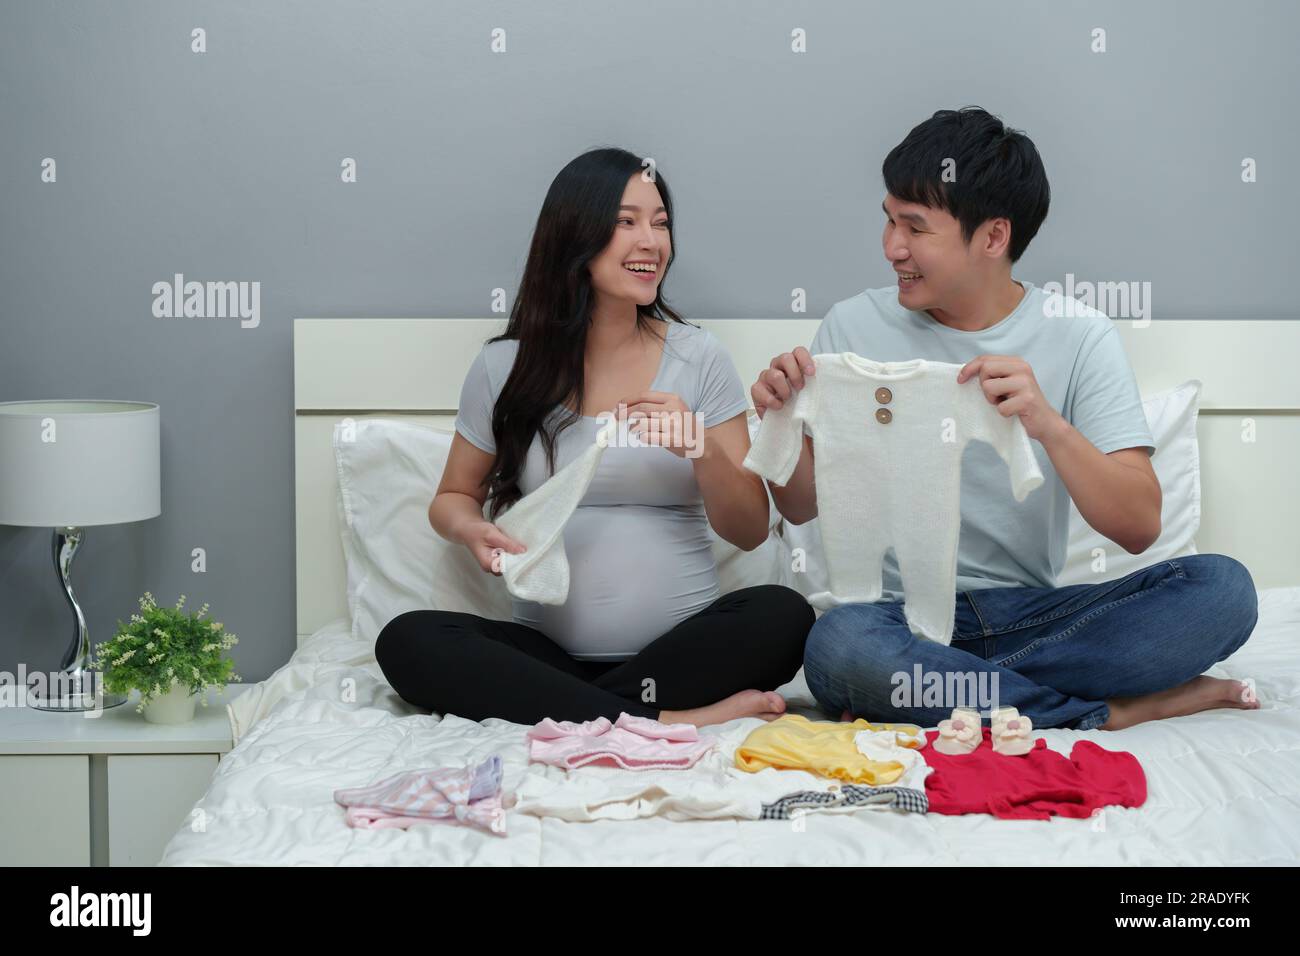 pregnant couple preparing baby clothes for newborn on a bed Stock Photo